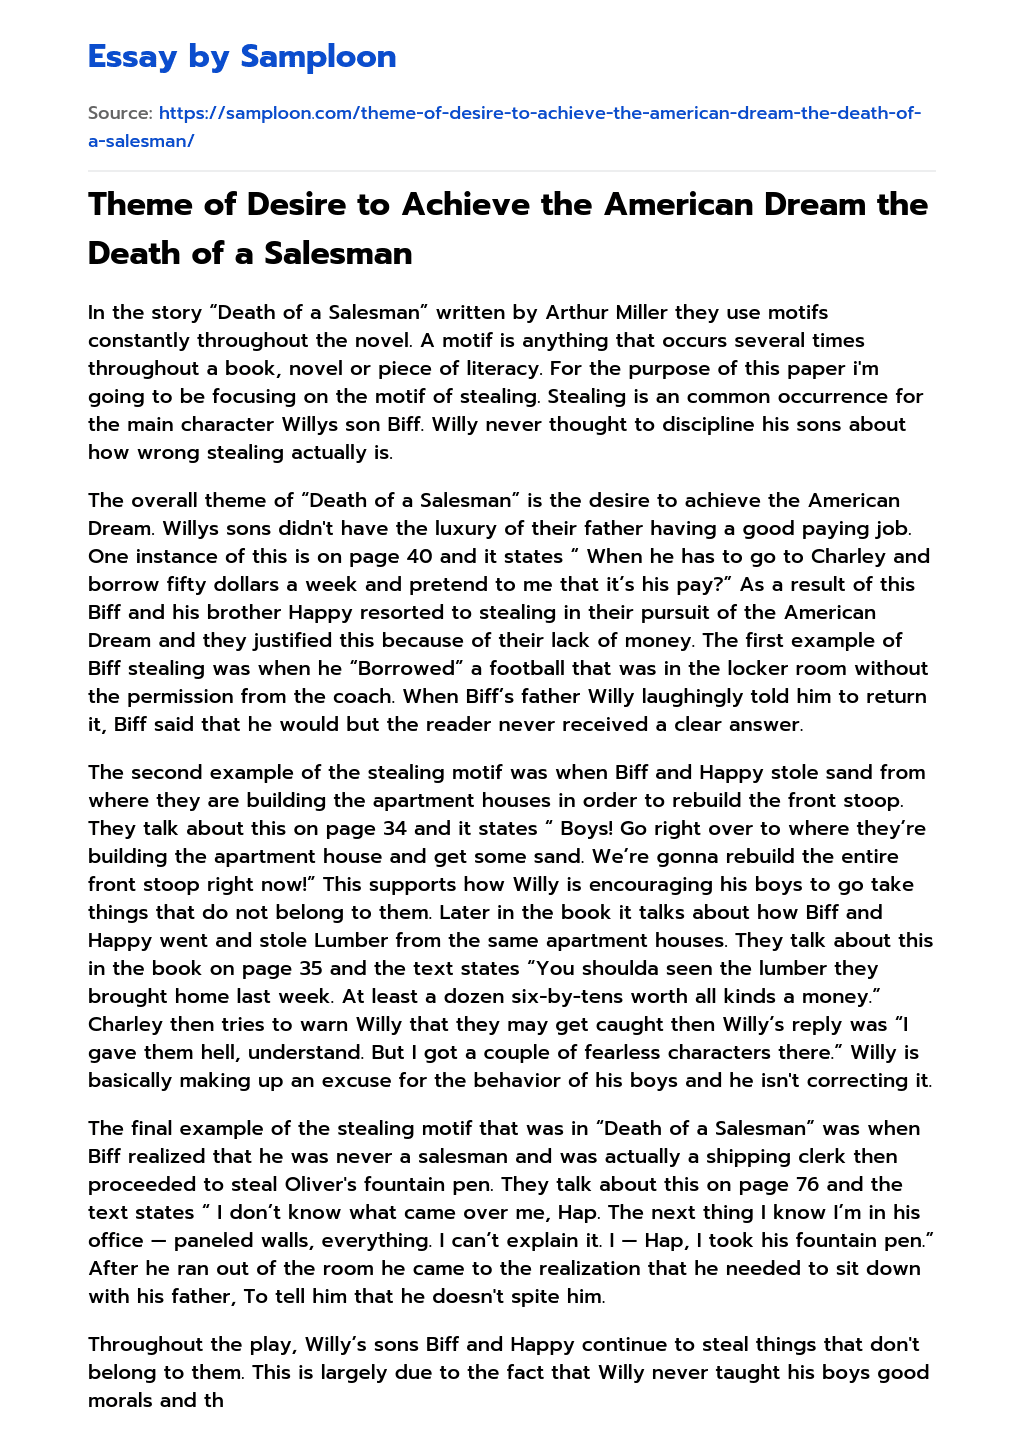 Theme of Desire to Achieve the American Dream the Death of a Salesman essay